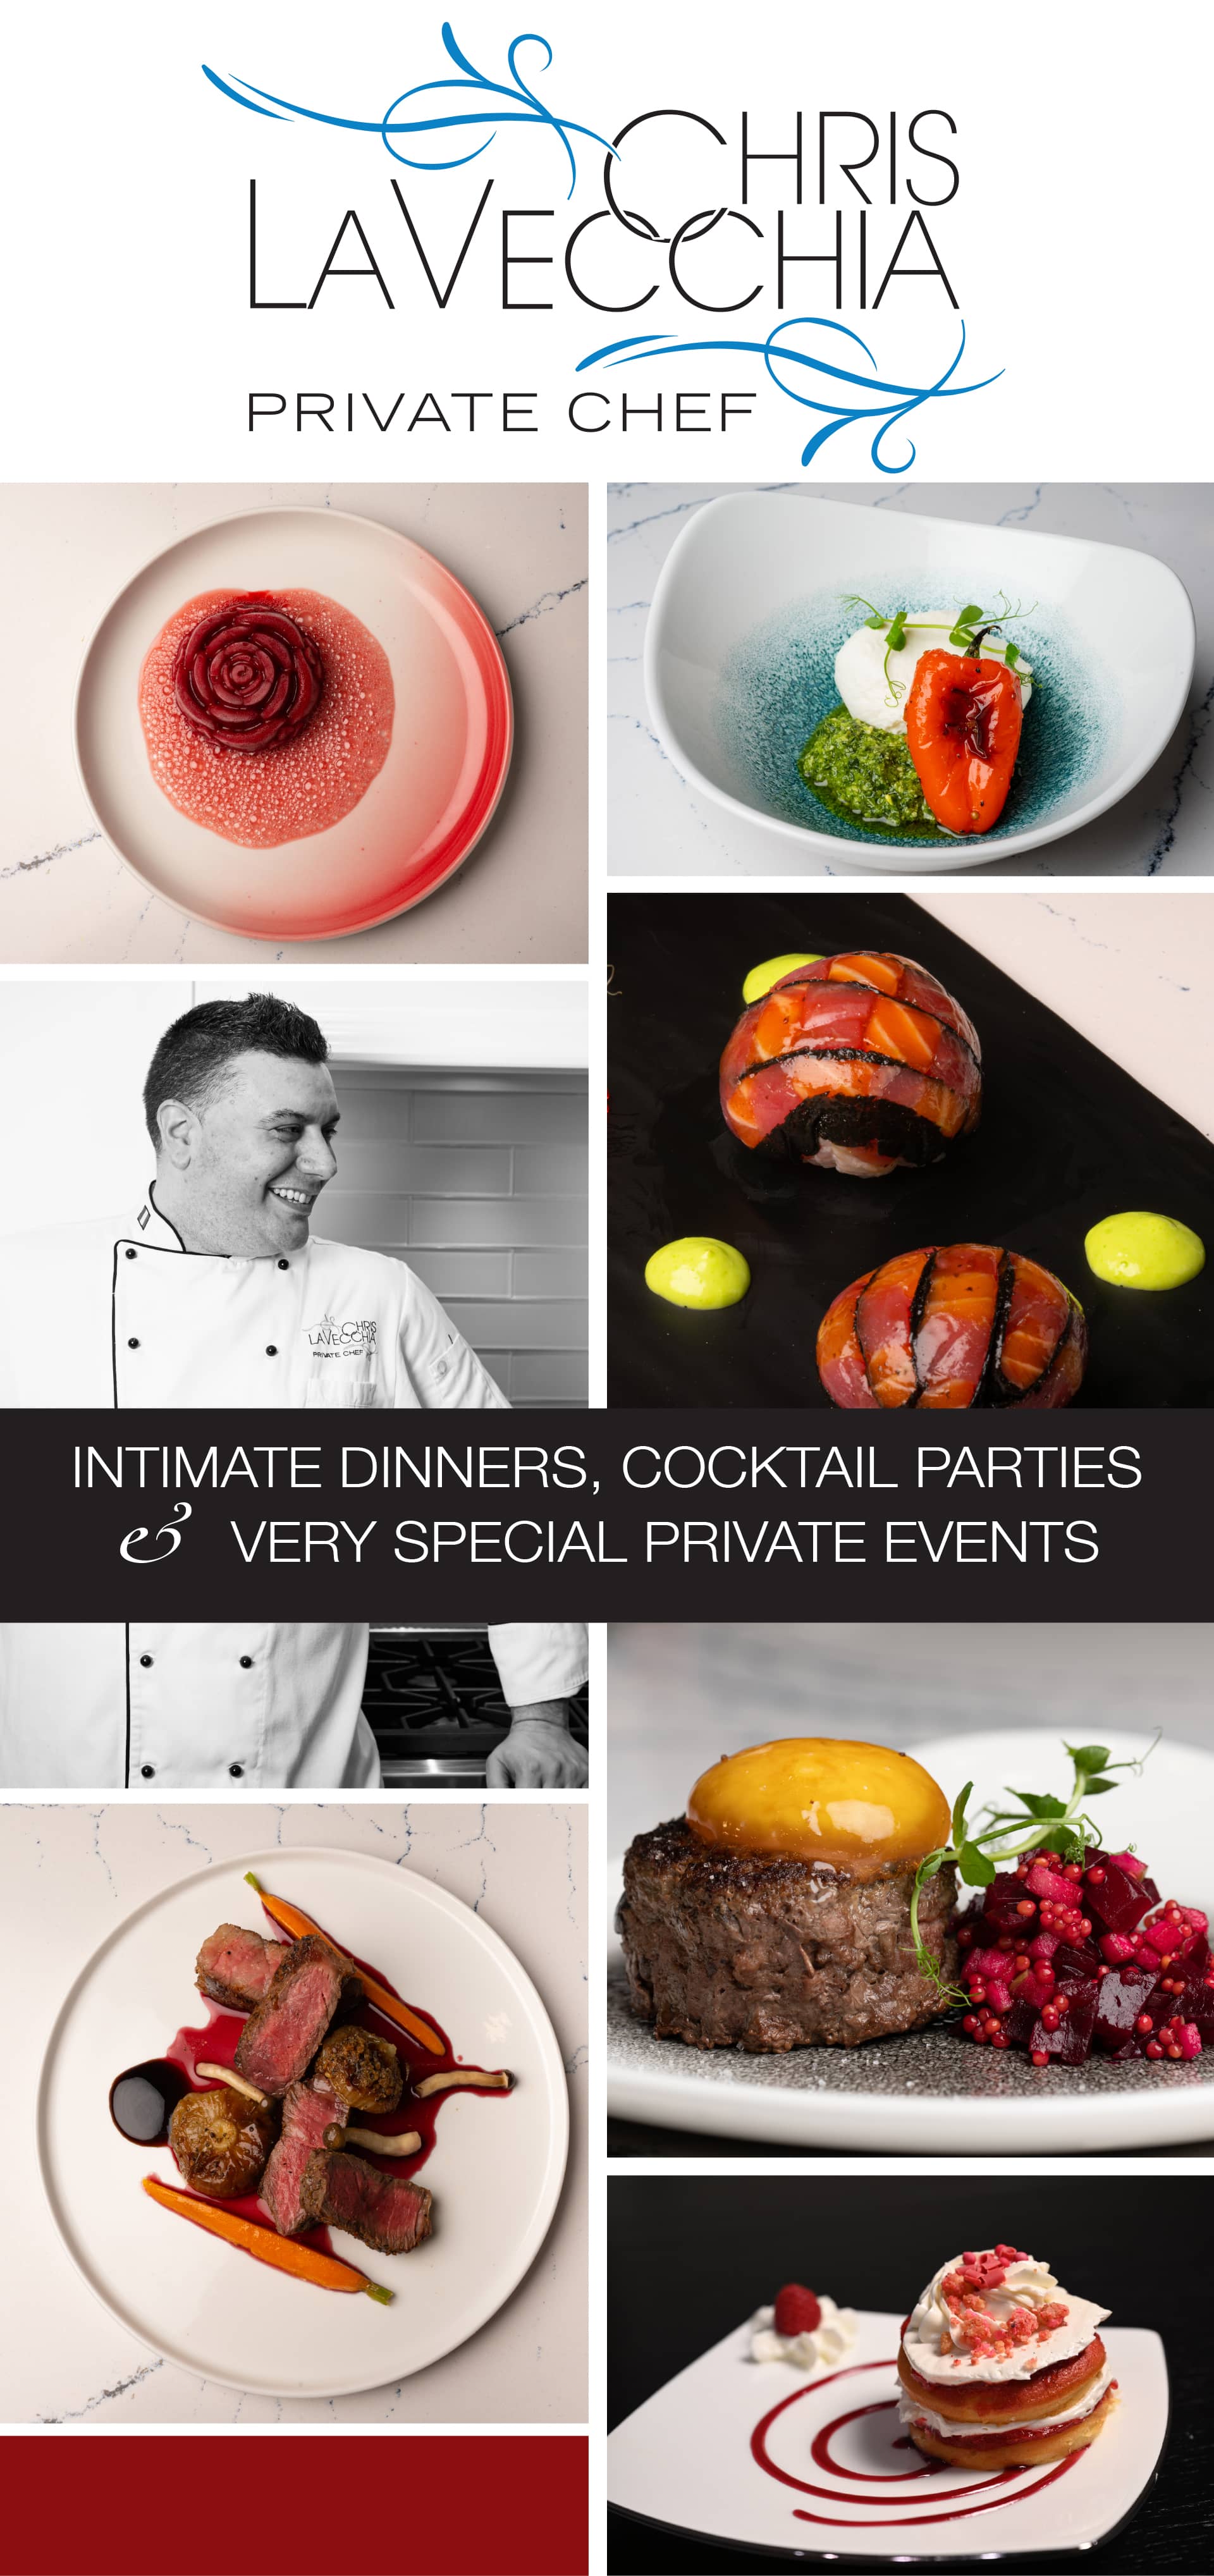 Ad for Chris LaVecchia, a private chef, showcasing exquisite dishes for special events